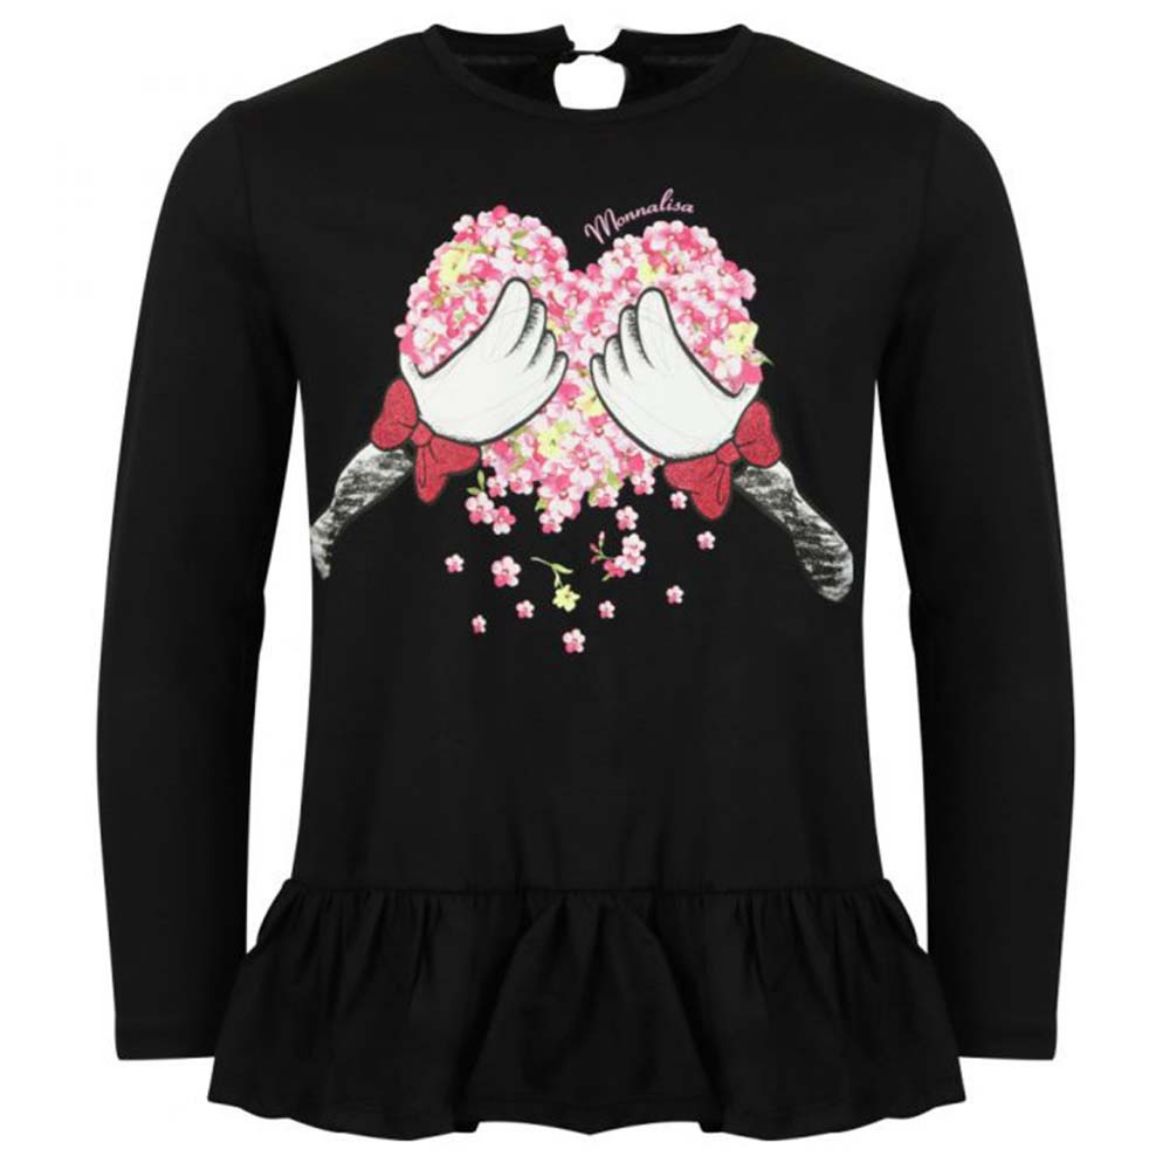 Picture of Monnalisa Girls Black Tunic Top With Heart Detail